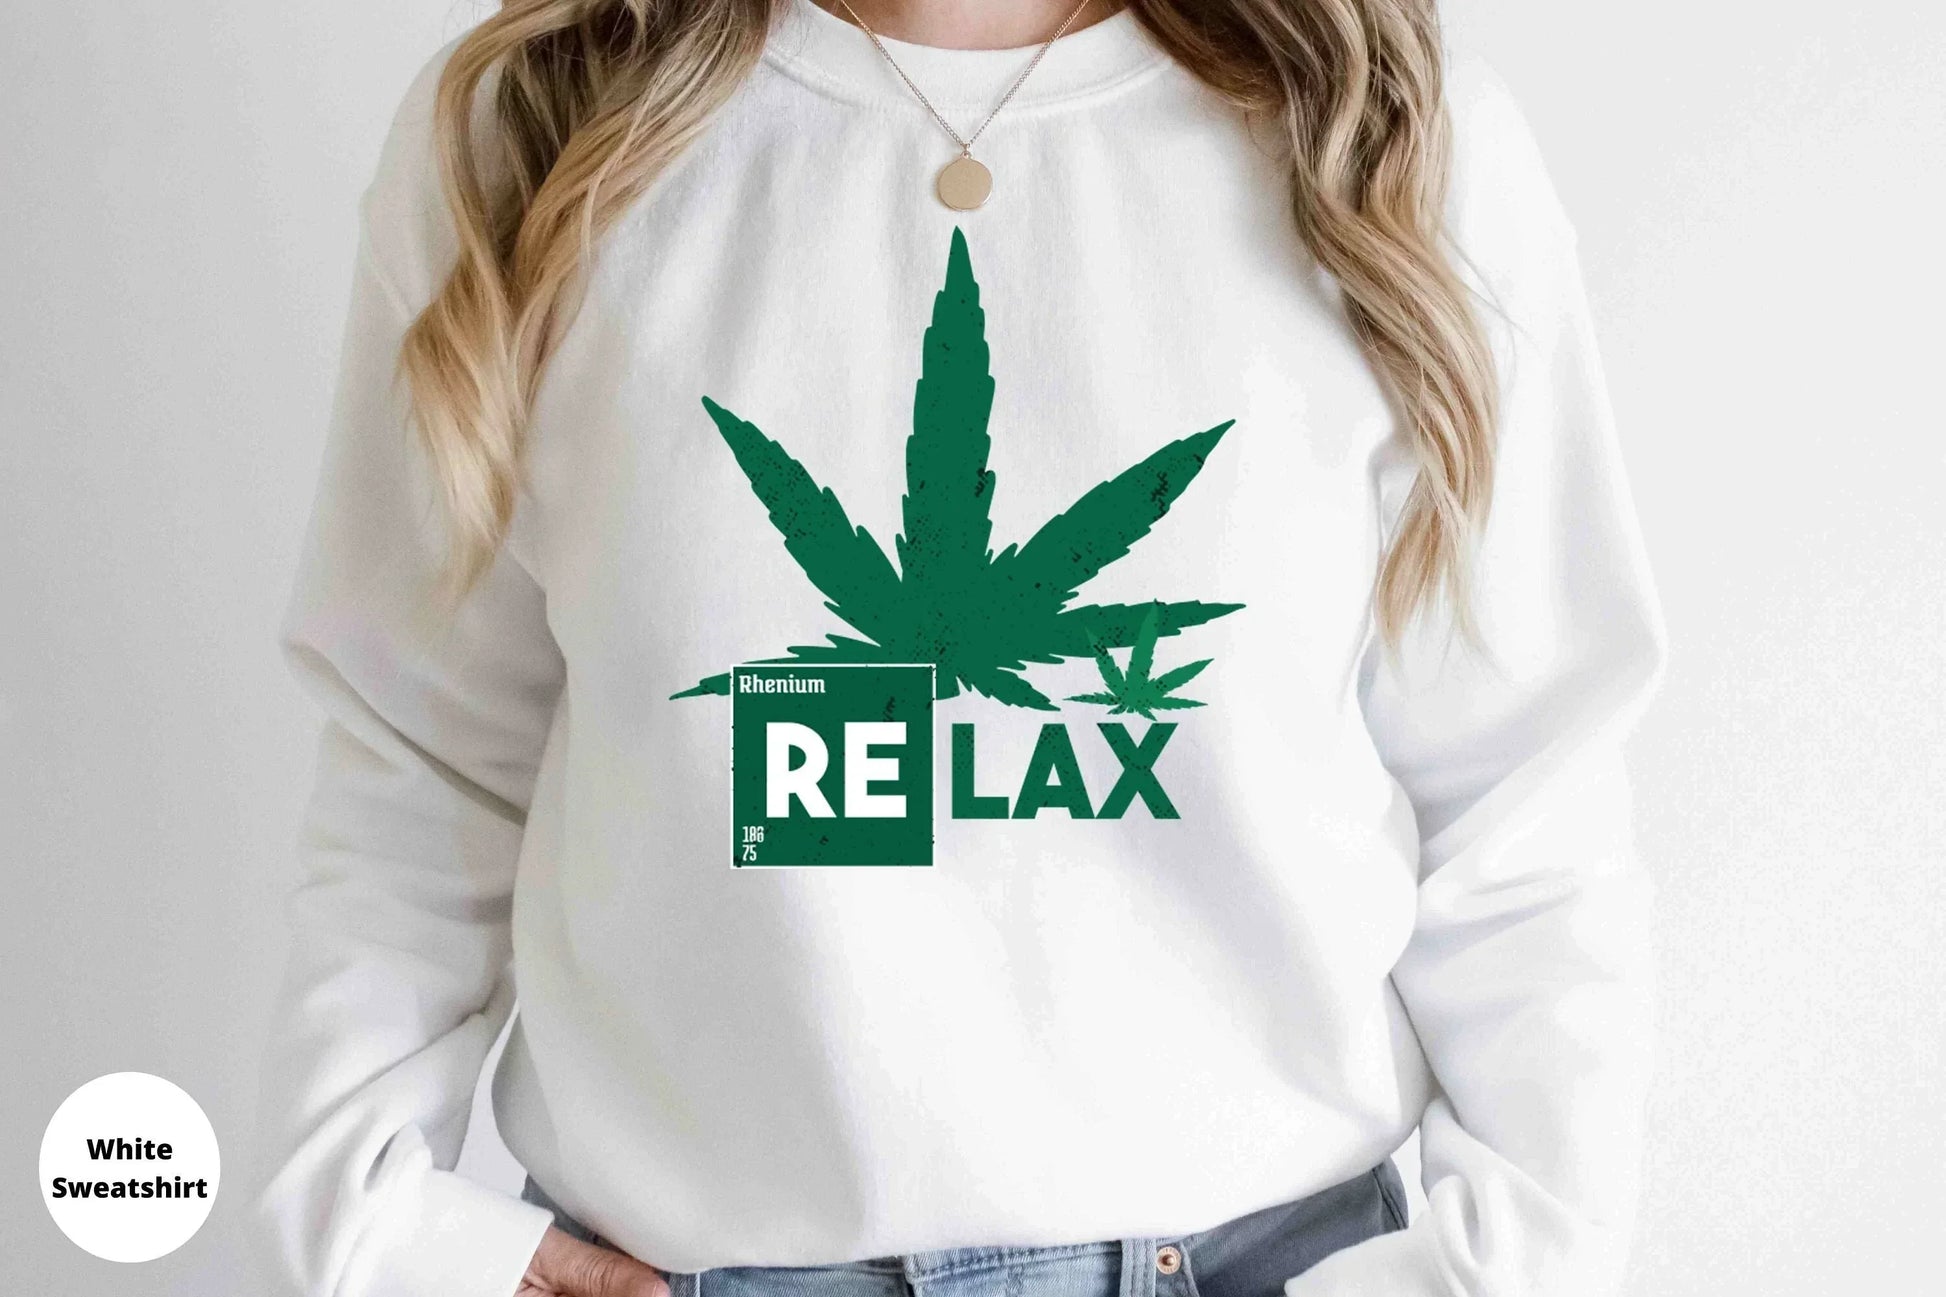 Stoner Shirt, Hippie Clothes, Marijuana Tshirt, Stoner Gifts for Him, Weed Shirt, 420 Gifts, Cannabis Clothing, Stoner Gifts for Her, 420